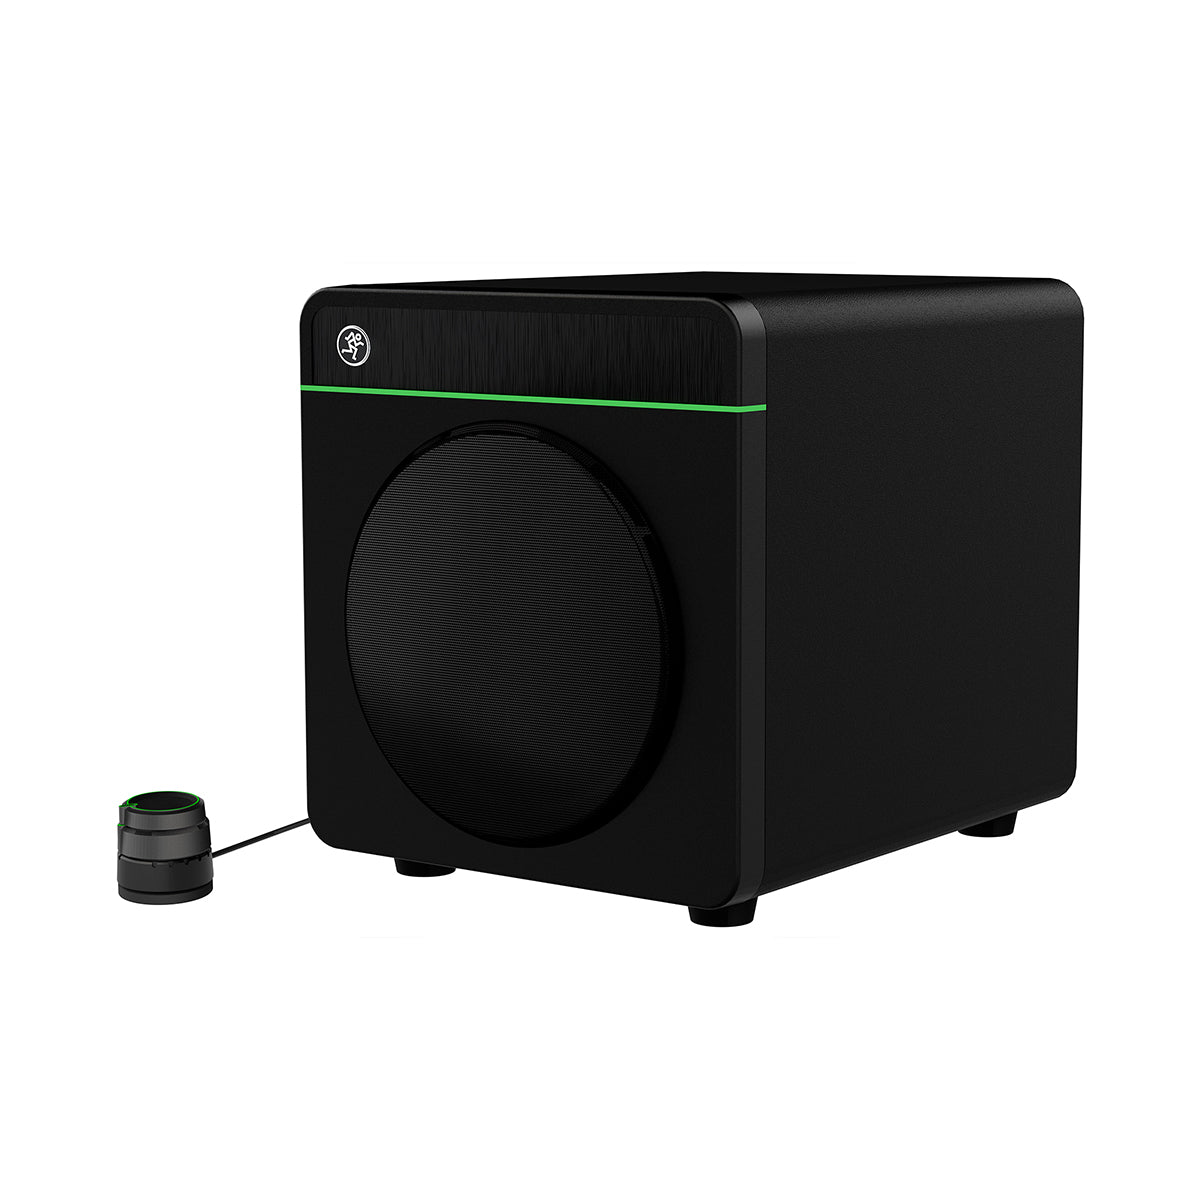 Mackie CR8S-XBT Subwoofer with Bluetooth